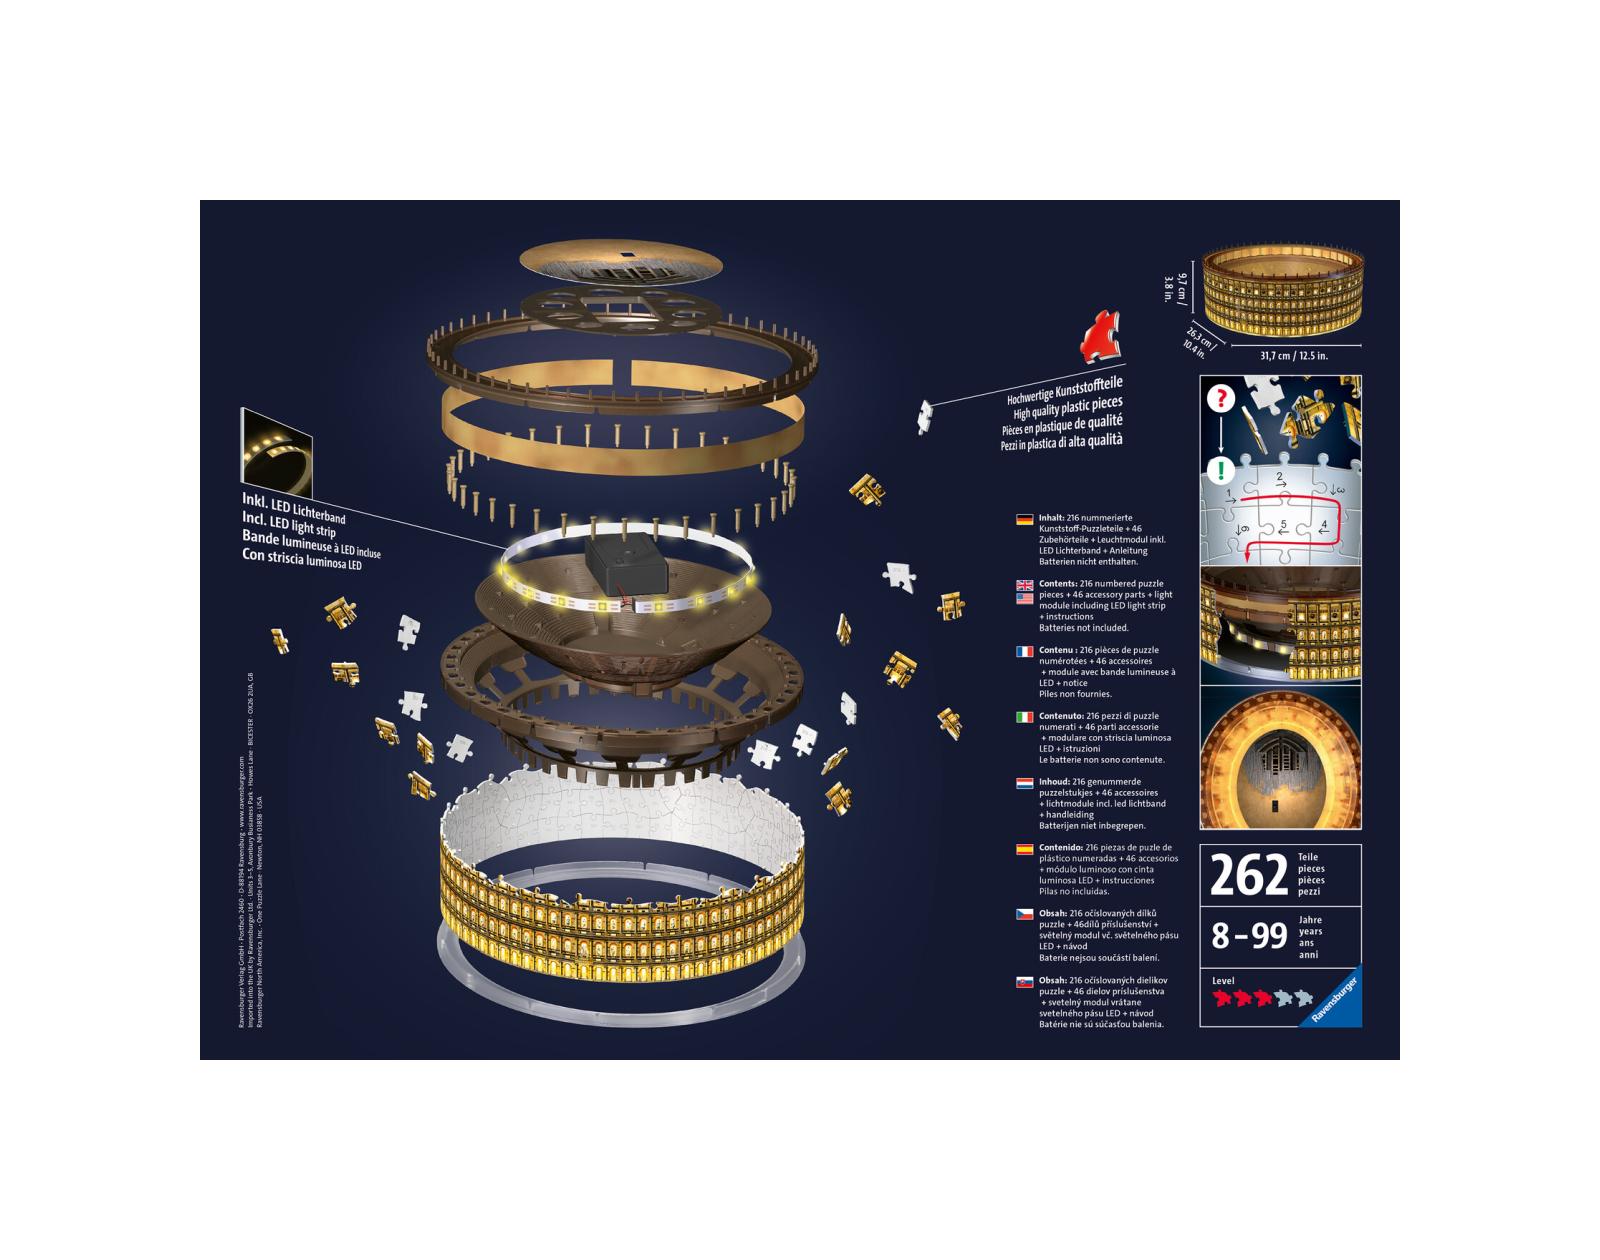 Ravensburger - 3d puzzle colosseo night edition, roma, 216 pezzi, 10+ anni - RAVENSBURGER 3D PUZZLE